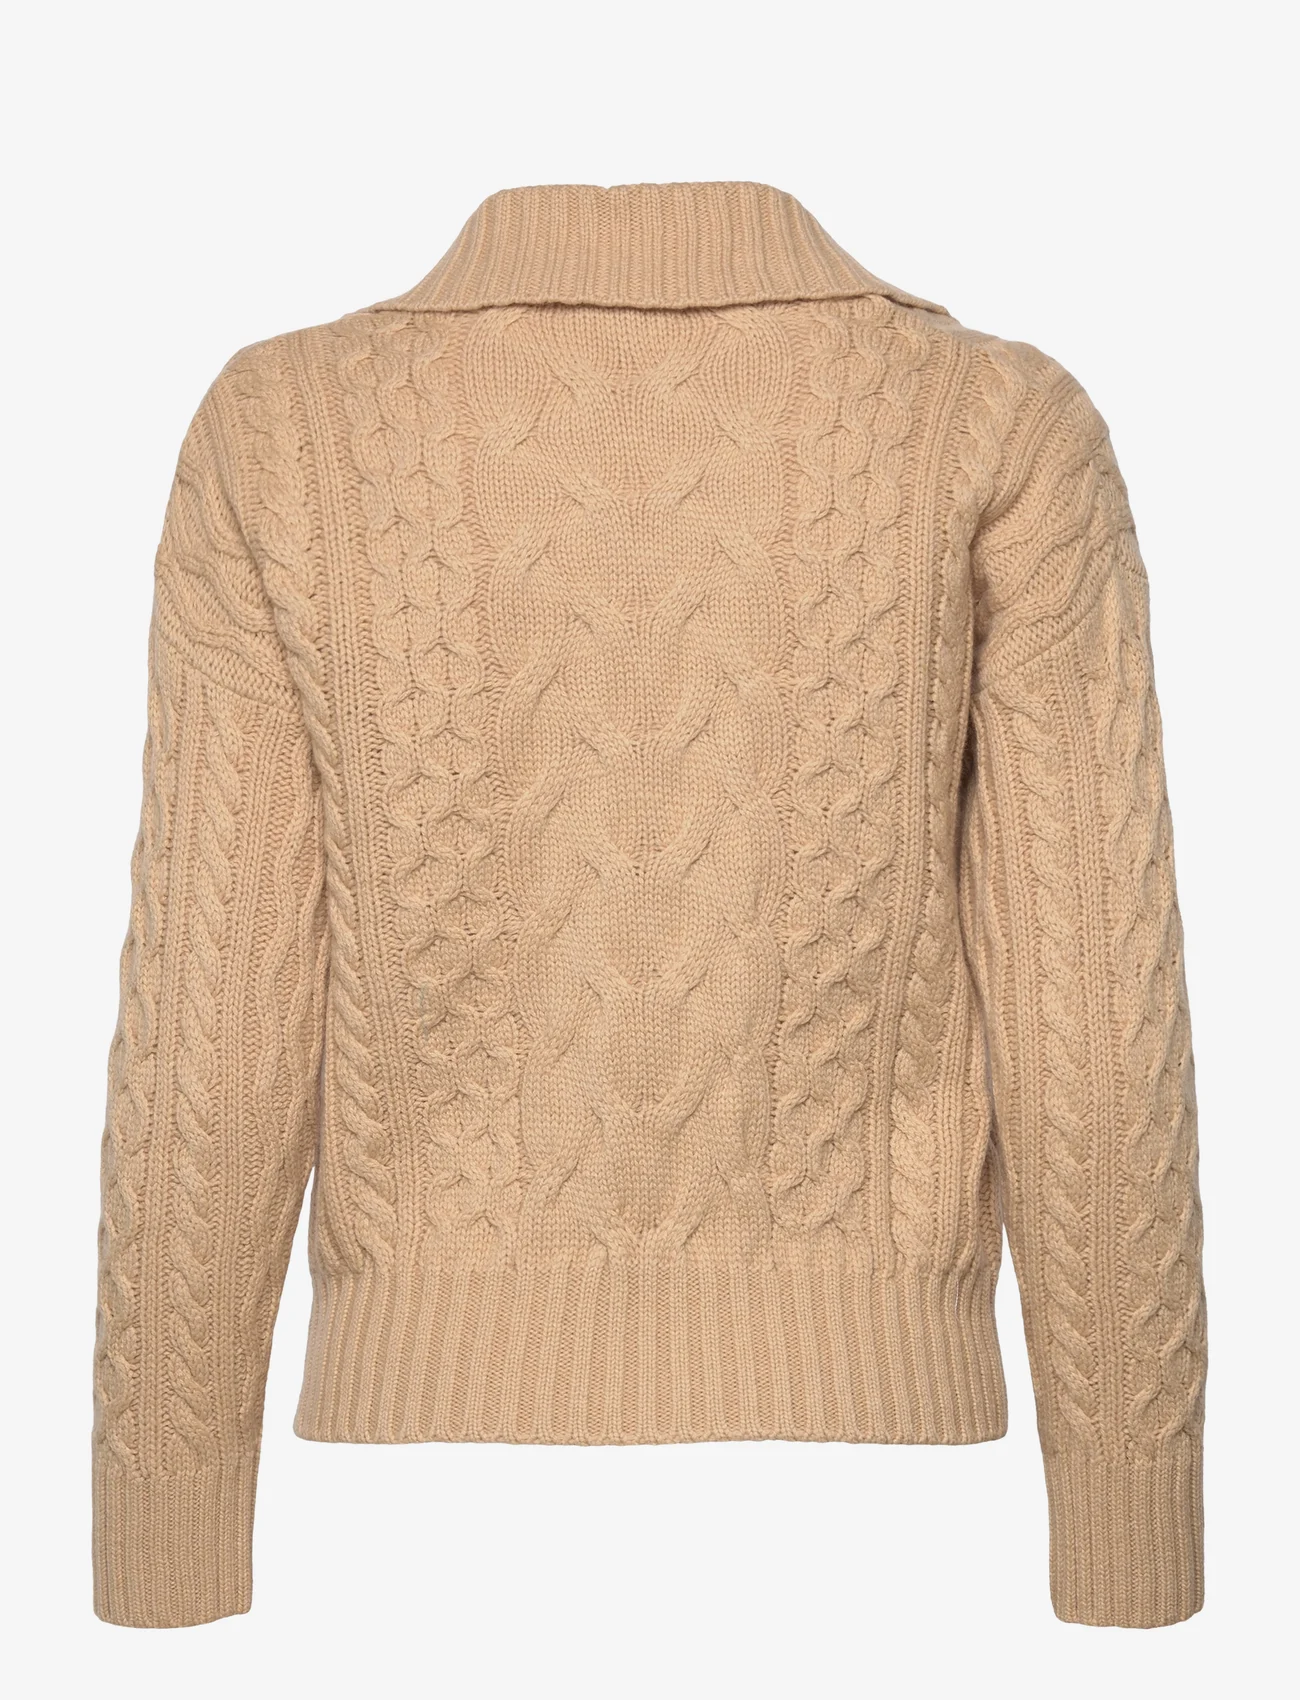 Andiata - Valerie knit - jumpers - croissant - 1